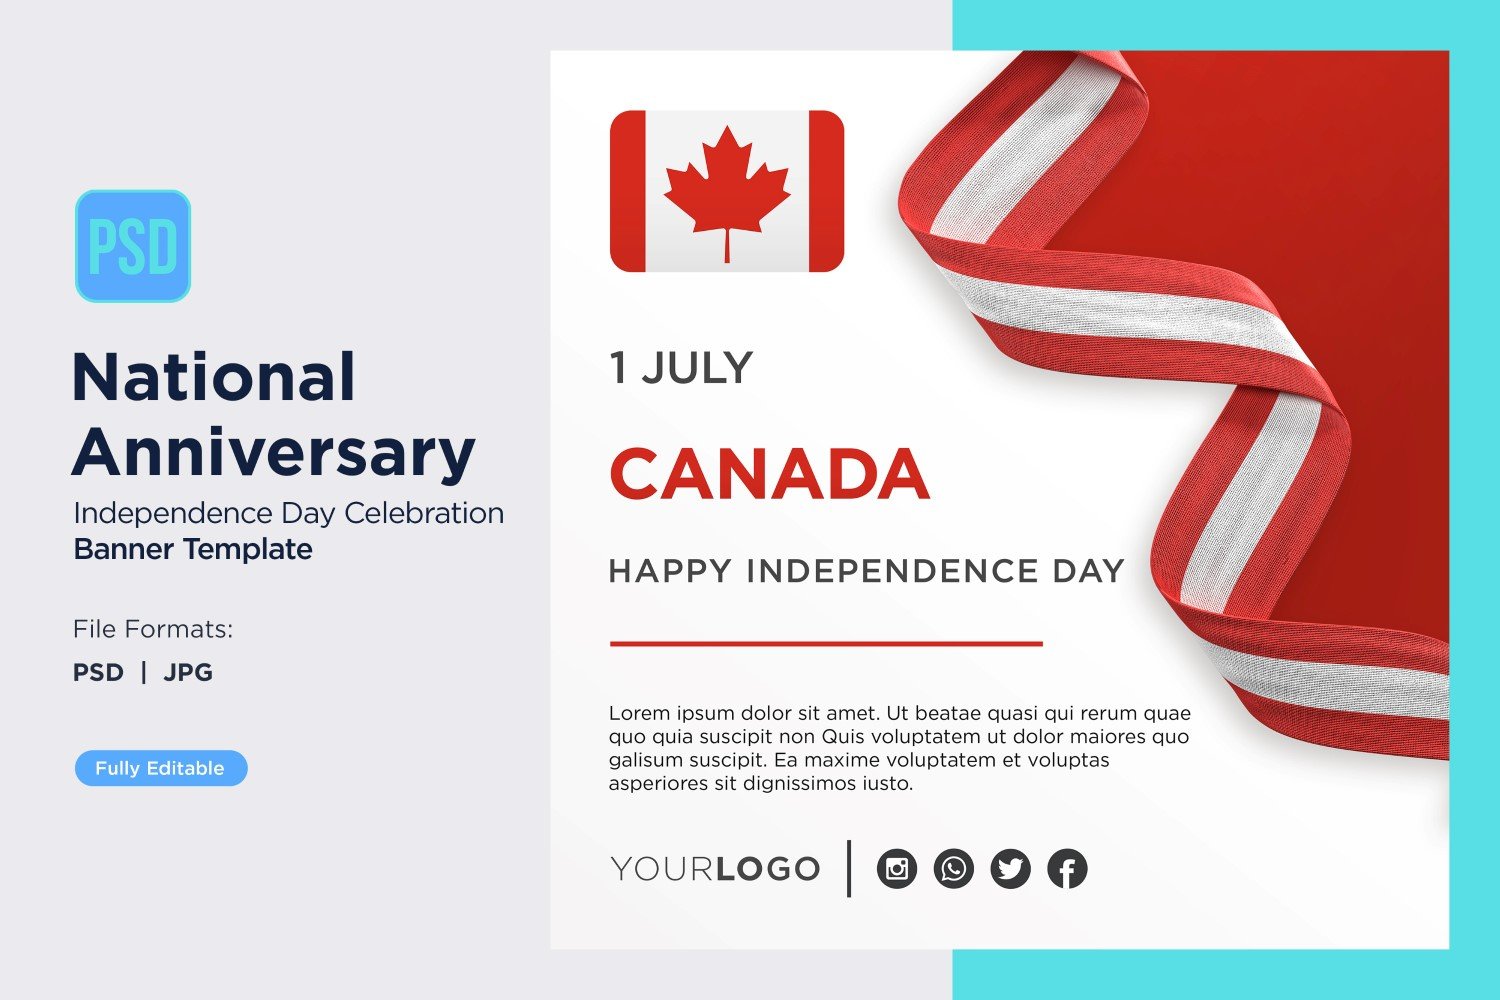 Template #402798 Day Celebration Webdesign Template - Logo template Preview